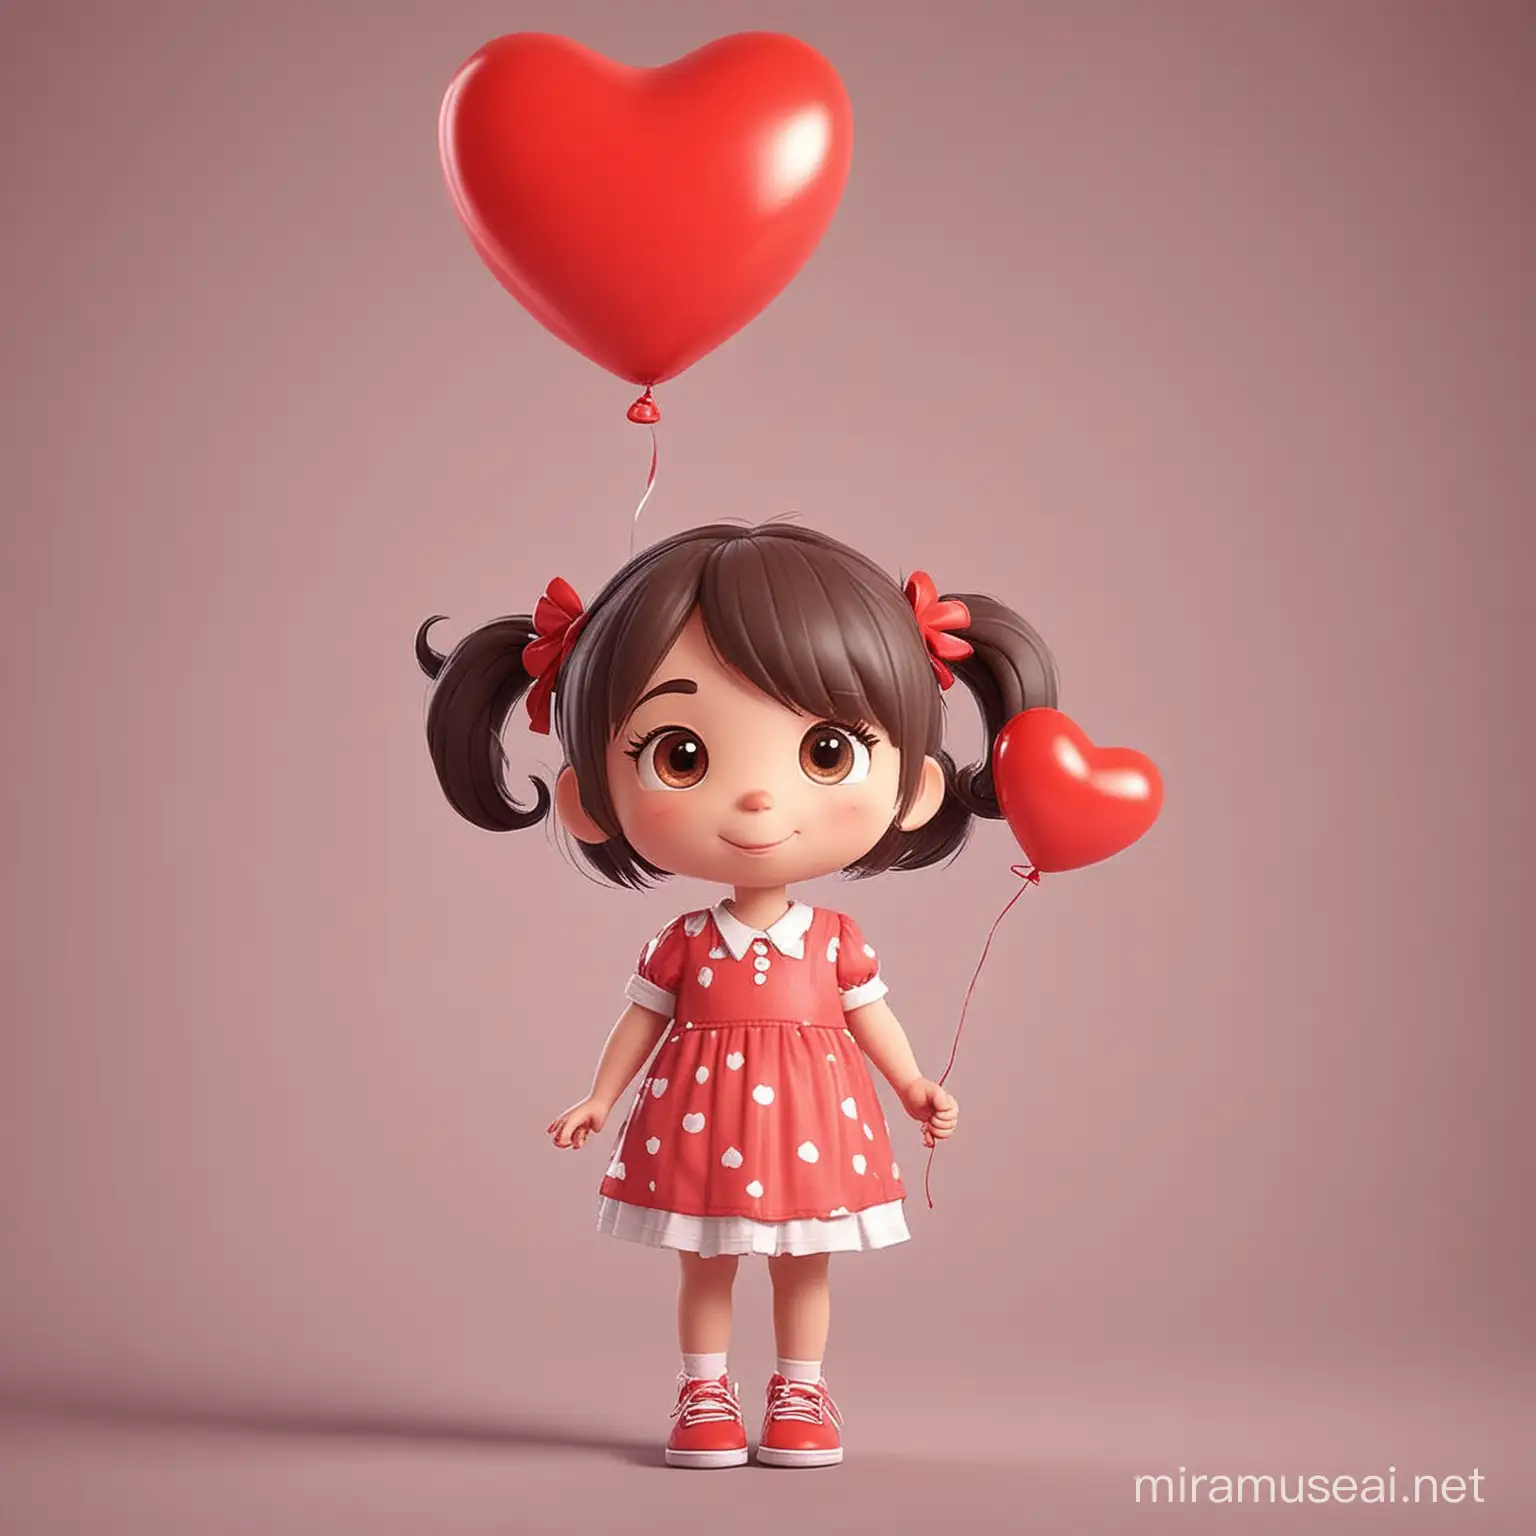 girl child animation style and balloon but with heart